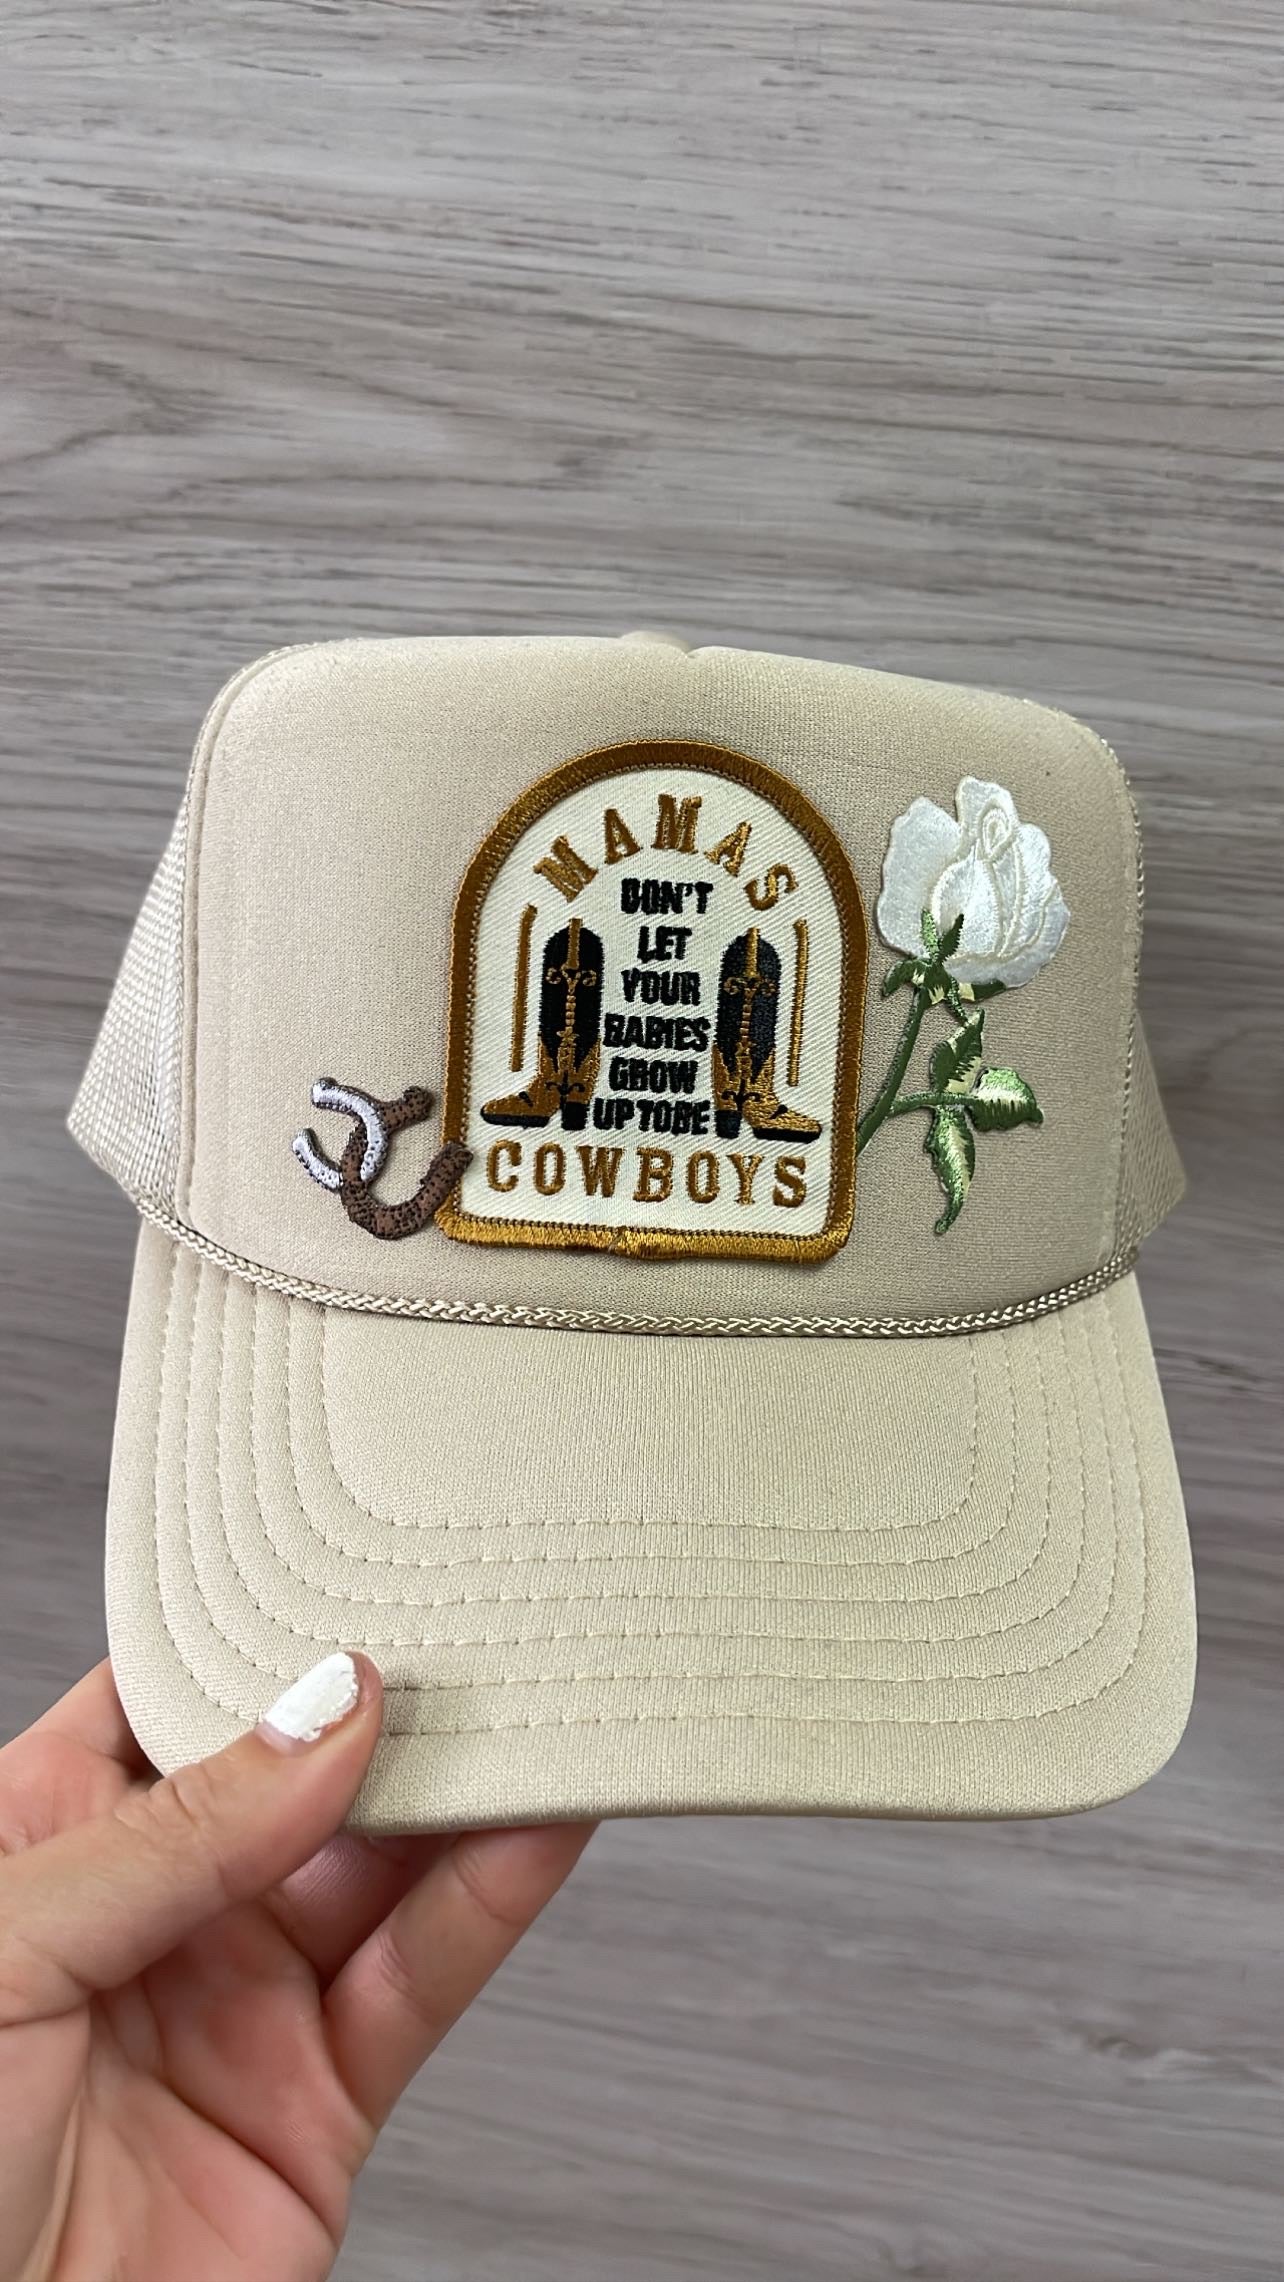 Mamas don’t let you babies grow up to be cowboys trucker hat